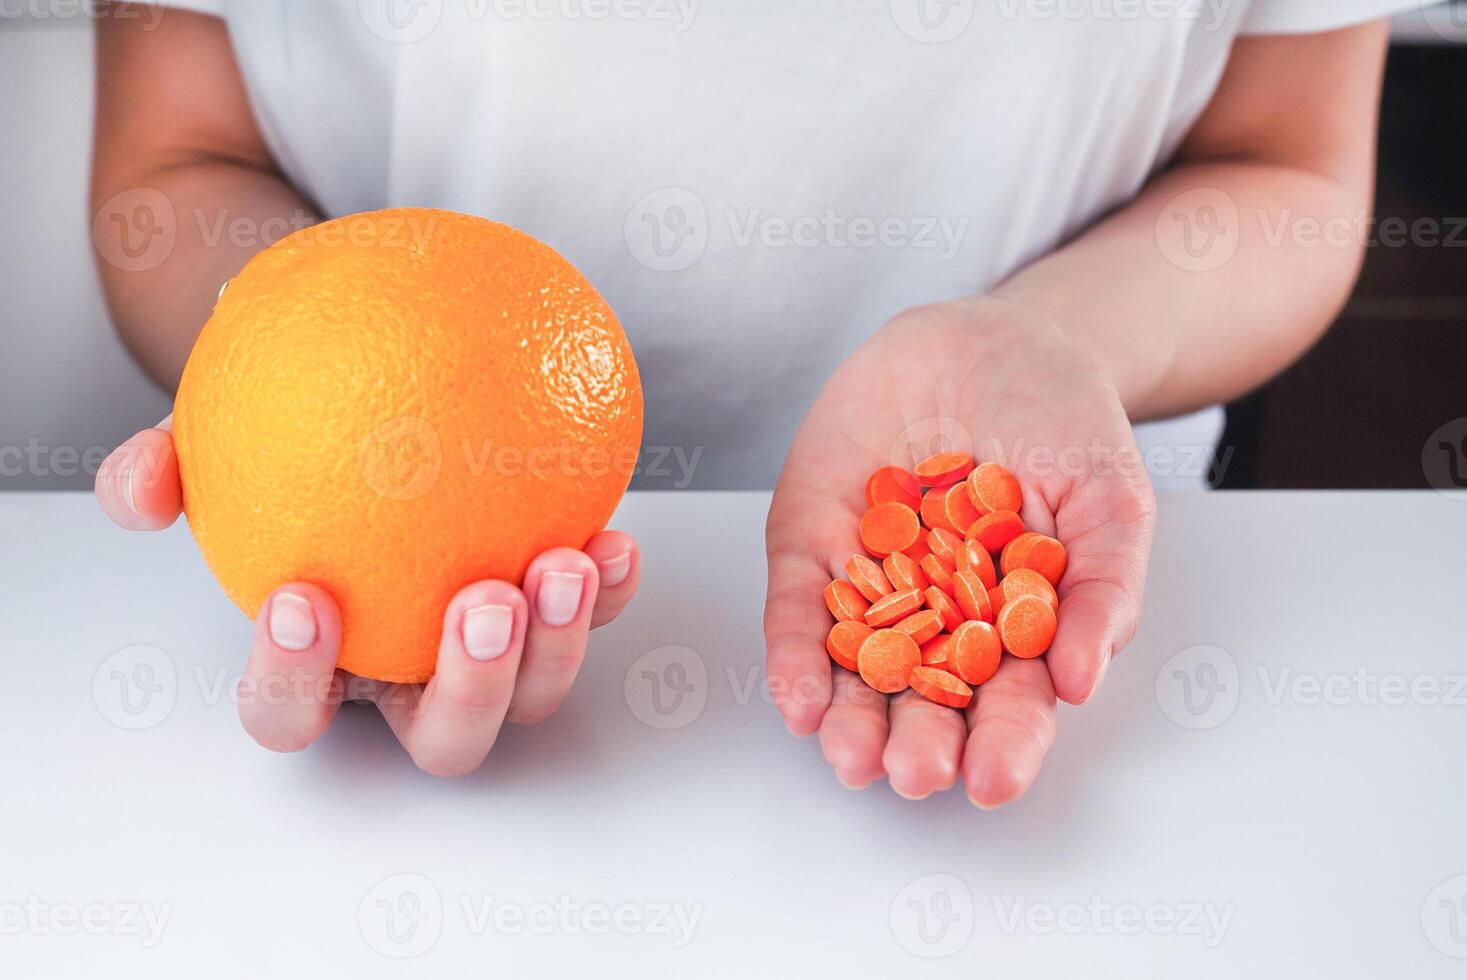 The girl is holding a ripe orange in one hand, and vitamin C tablets in the other hand. Choice between natural and synthetic way of health care. Healthy lifestyle concept. Close-up. photo